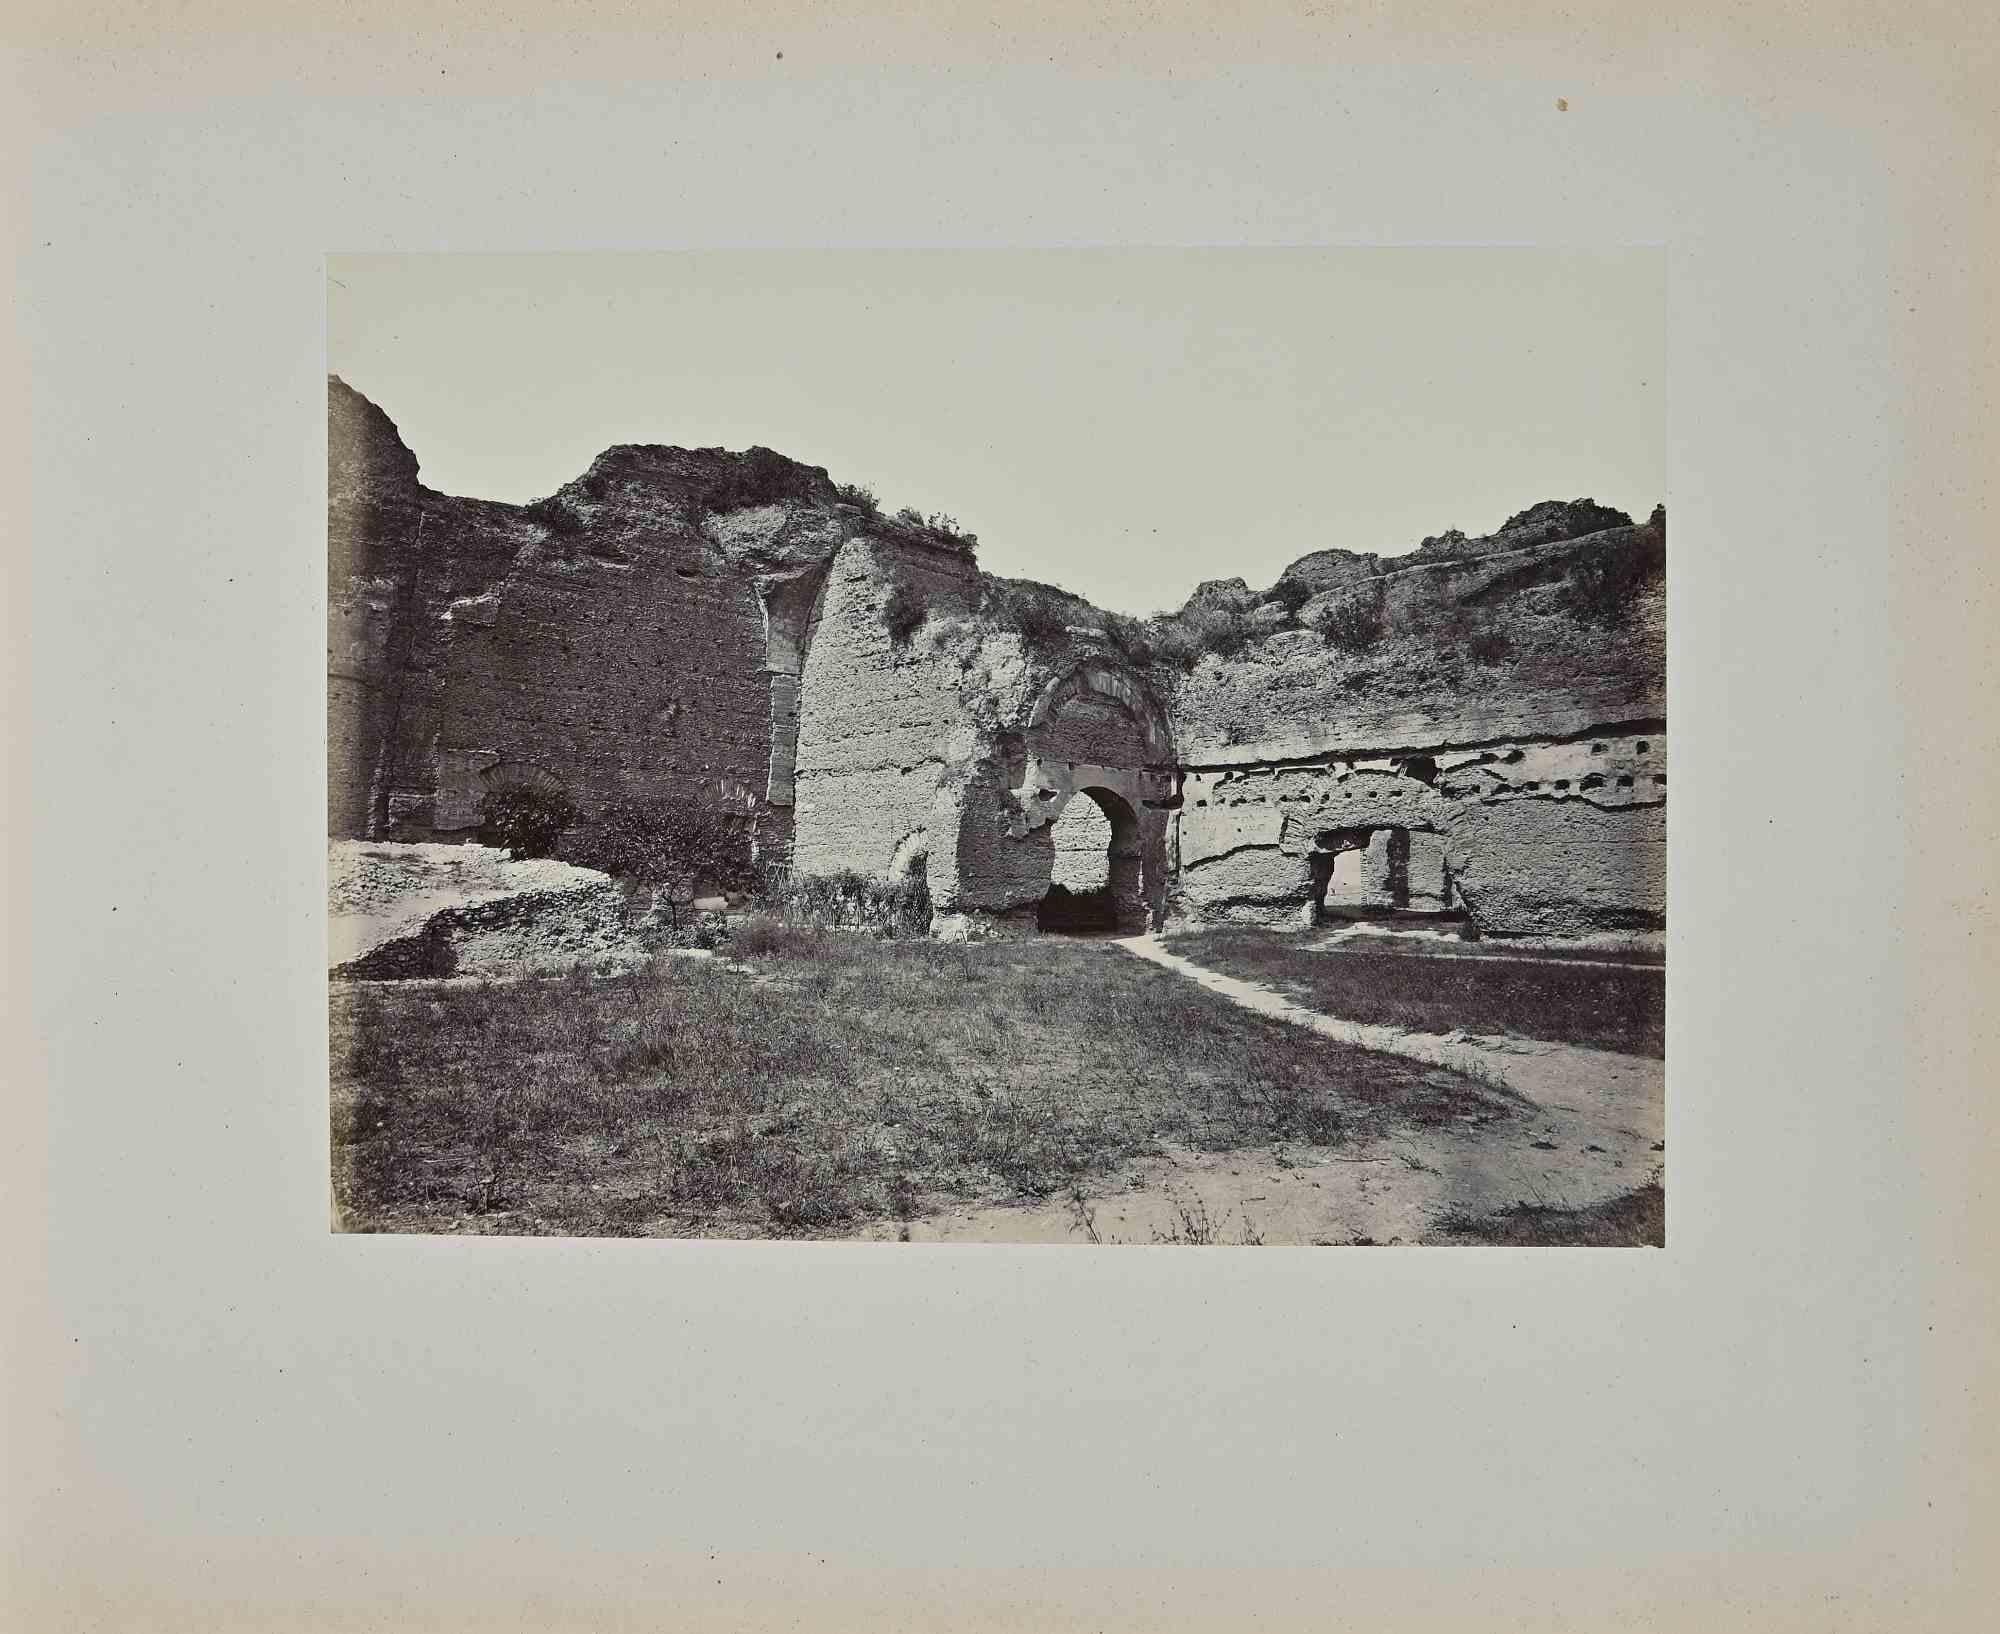 Francesco Sidoli Landscape Photograph - View of Ancient Rome - Photograph by F. Sidoli - Late 19th Century